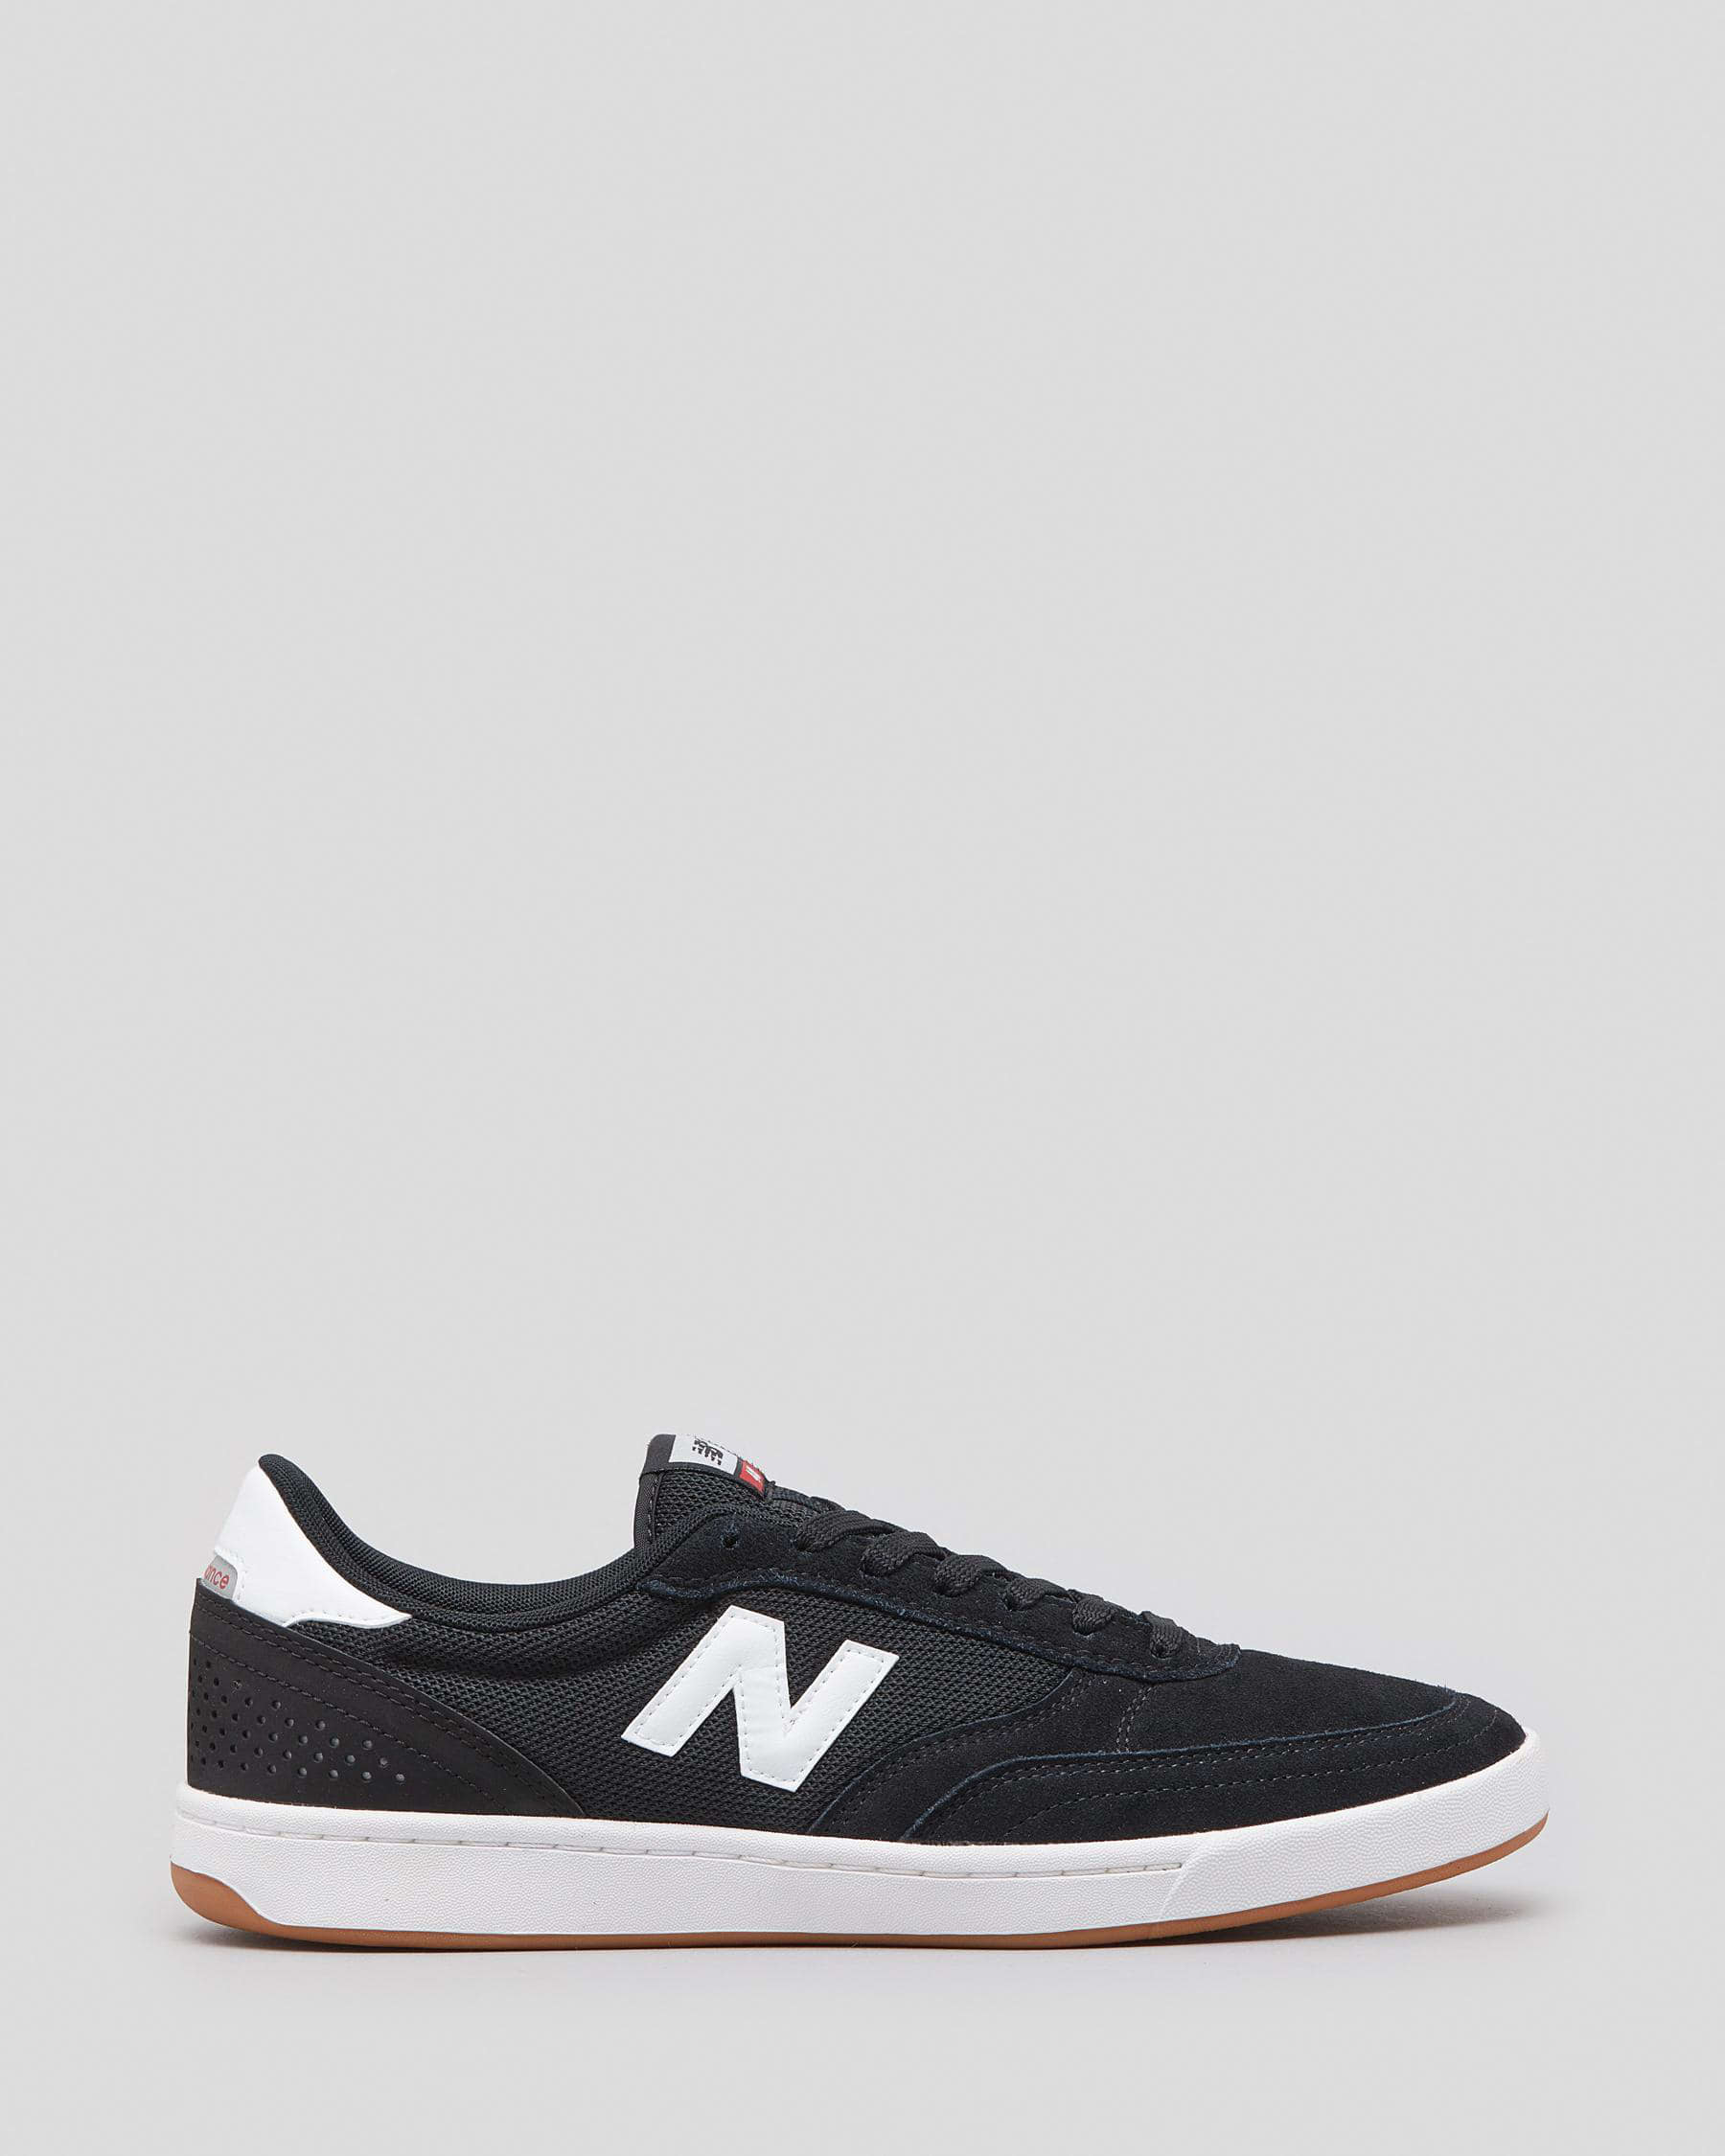 Shop New Balance NB 440 Shoes In Black/white - Fast Shipping & Easy ...